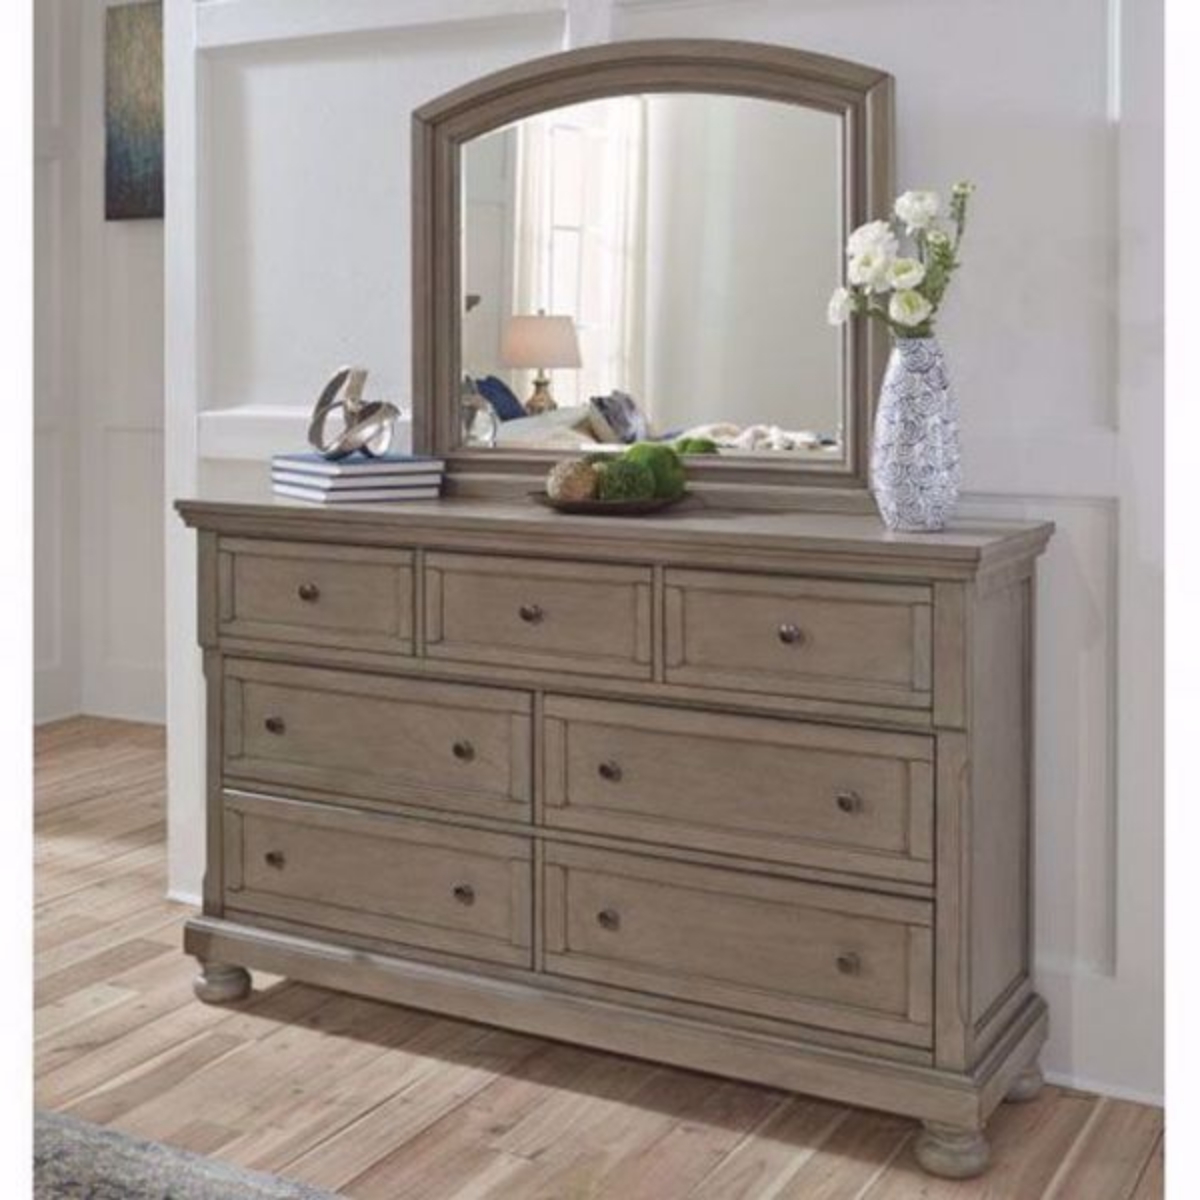 Picture of Kenley Gray Dresser